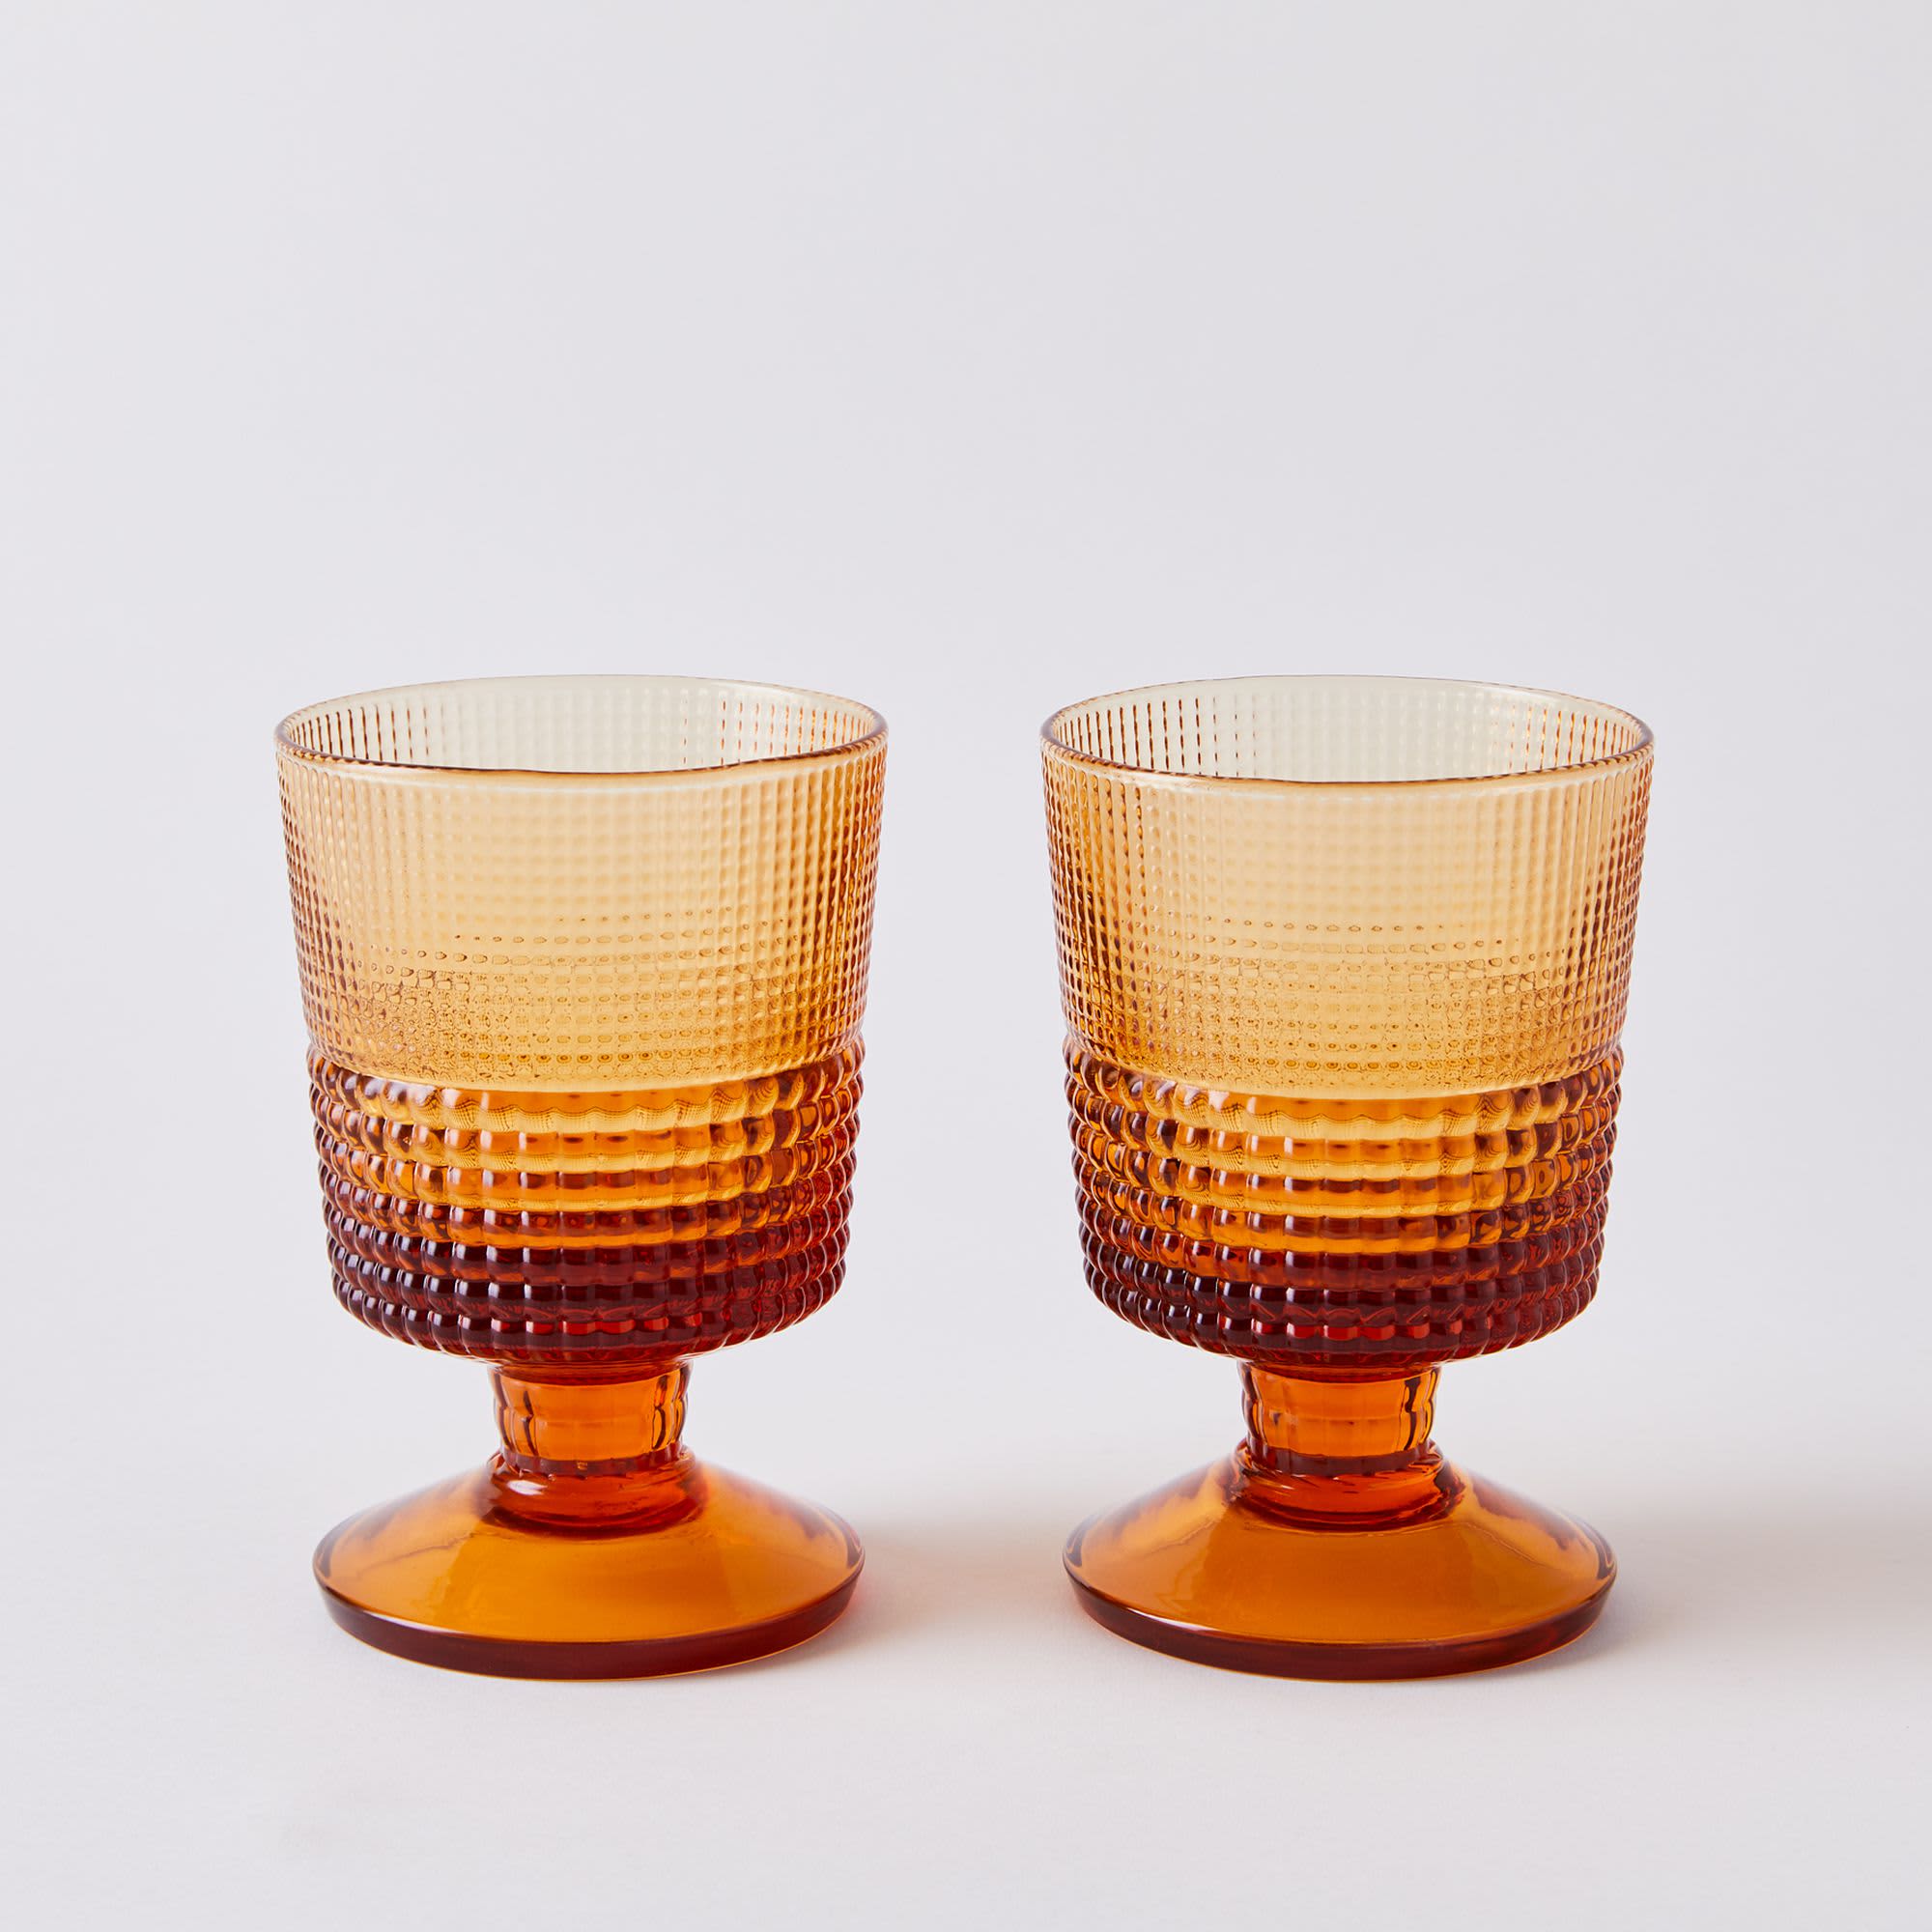 Colored Glassware Is the Tableware Trend We're Loving for Summer 2021